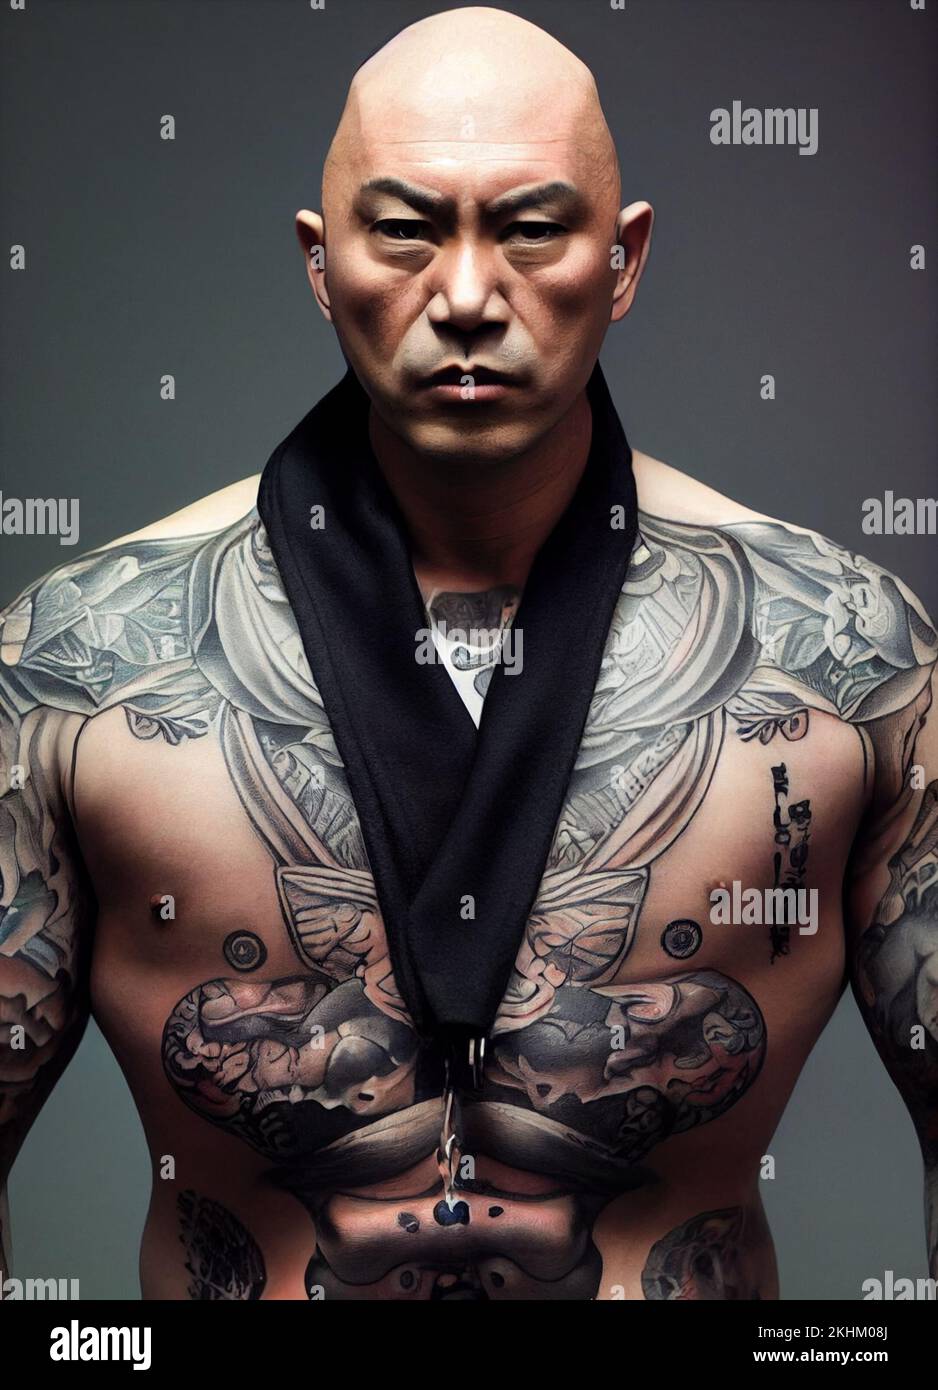 Fugitive from Japanese yakuza gang is given away by tattoos